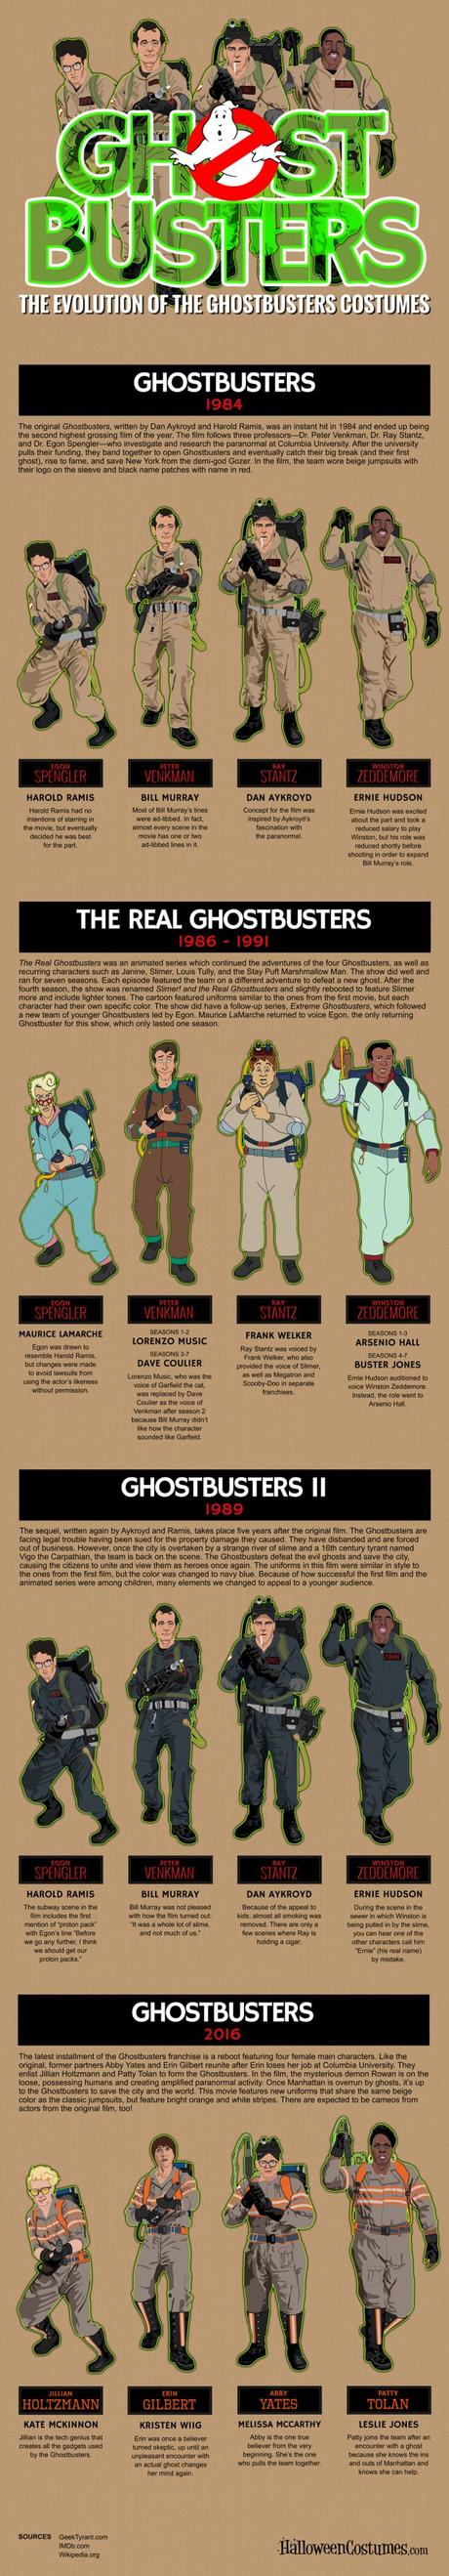 Has the Ghostbusters Costume Basically Stayed the Same Over the Years? – An Infographic